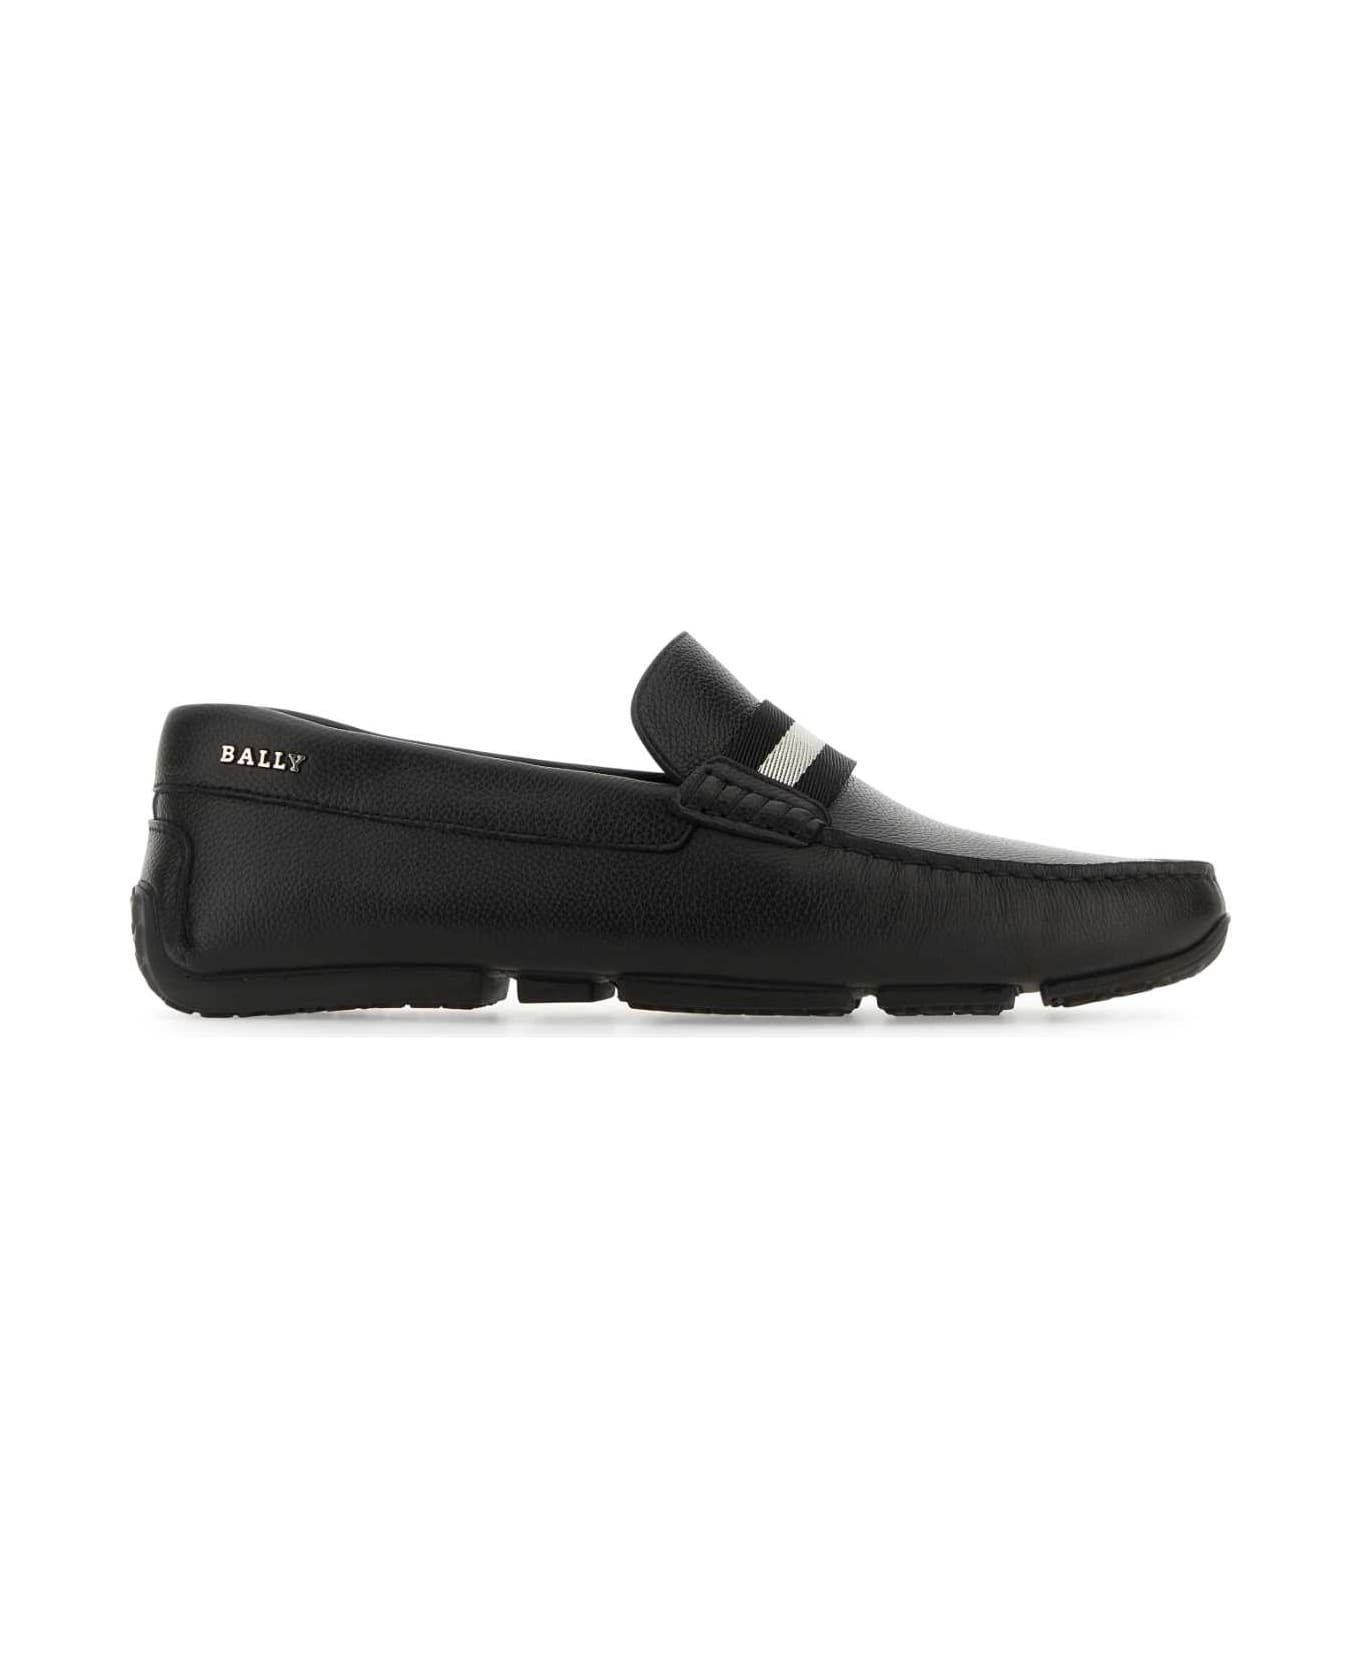 Bally Black Leather Pearce Loafers - BLACK